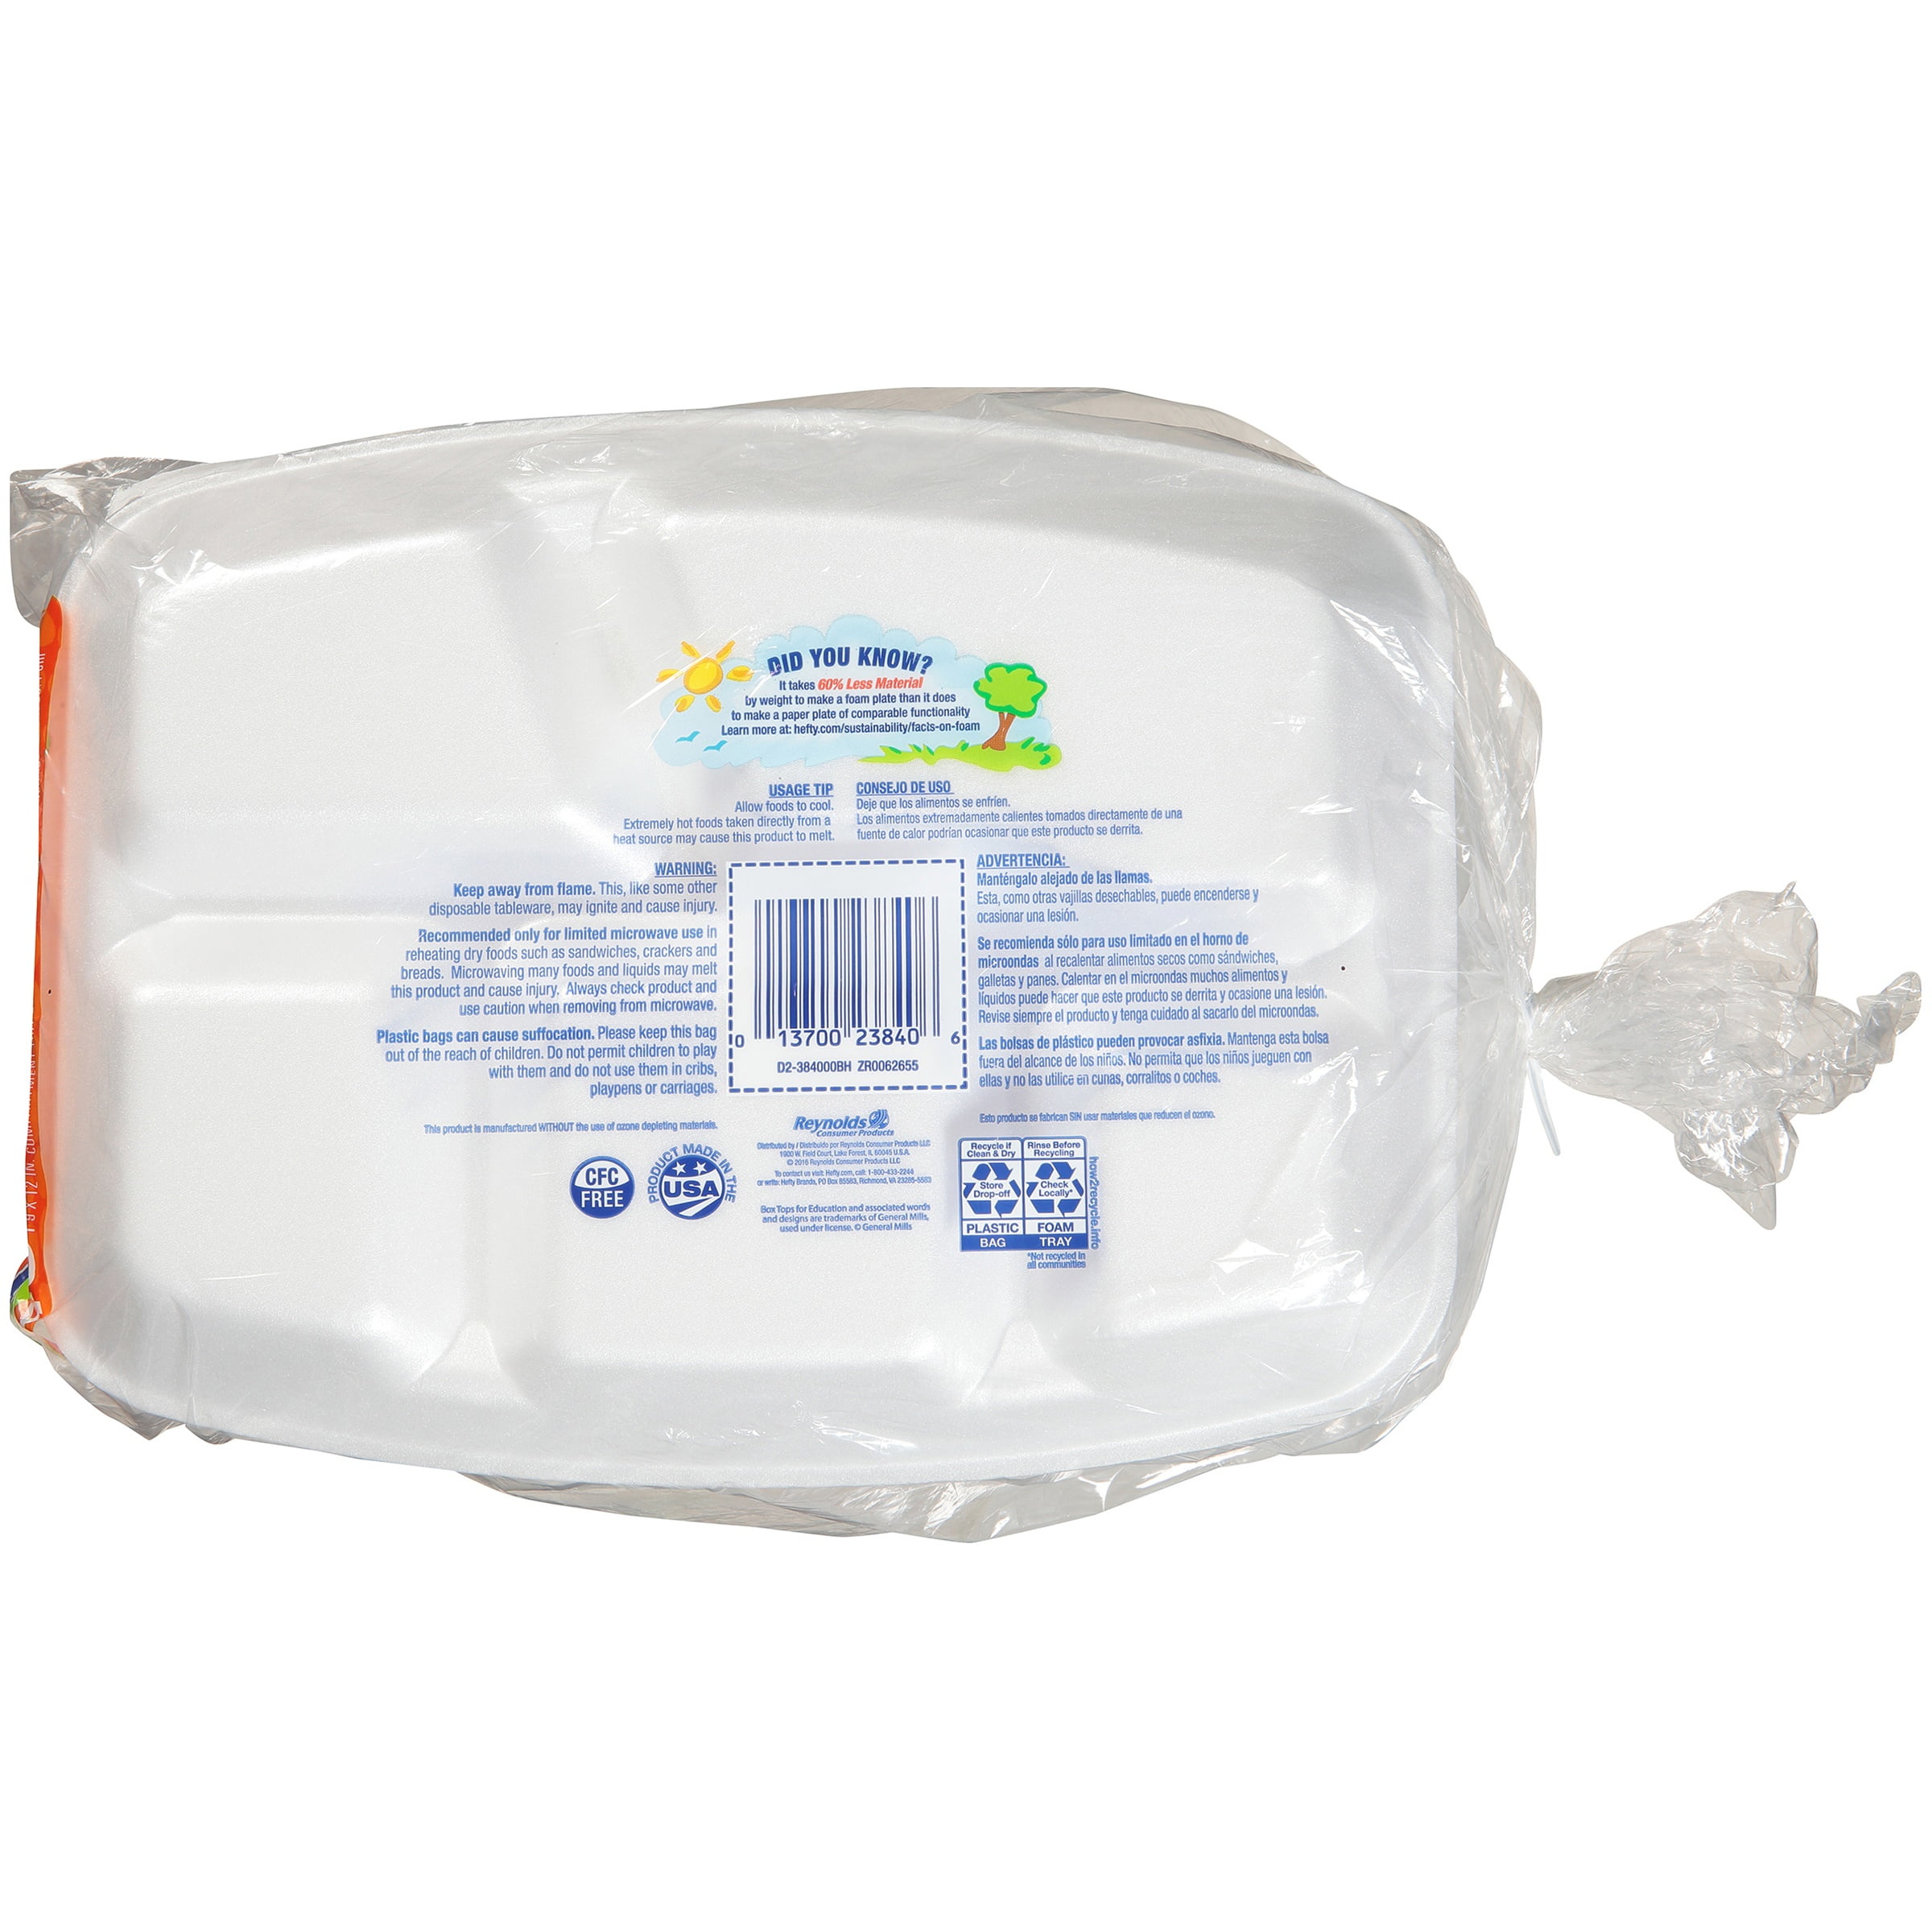 Plix Absorbent Tray 11 x 9 - TPM Packaging